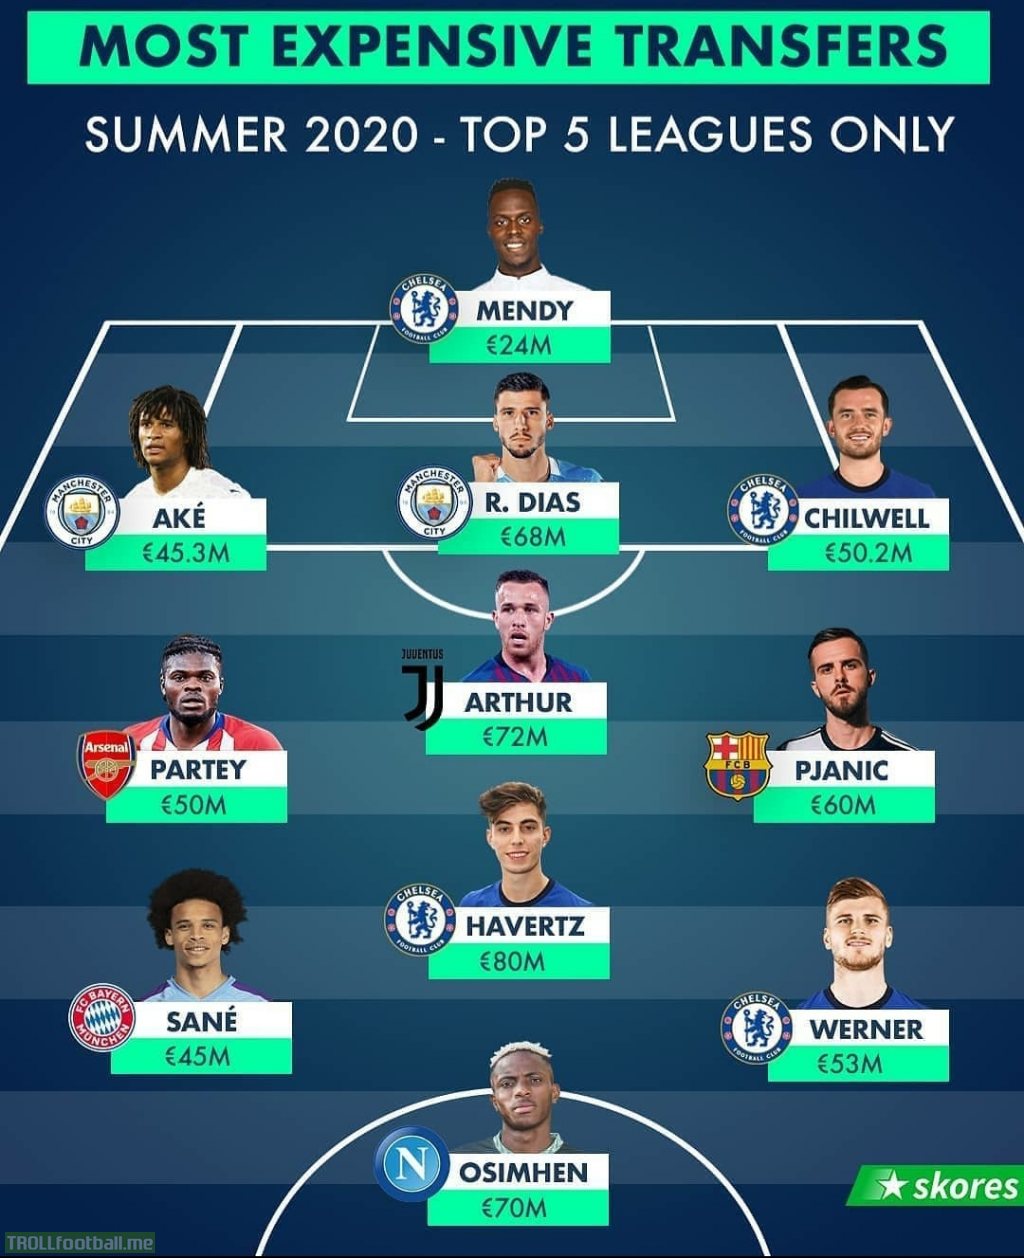 Chelsea with 4 players in the most expensive XI of the summer transfer window.